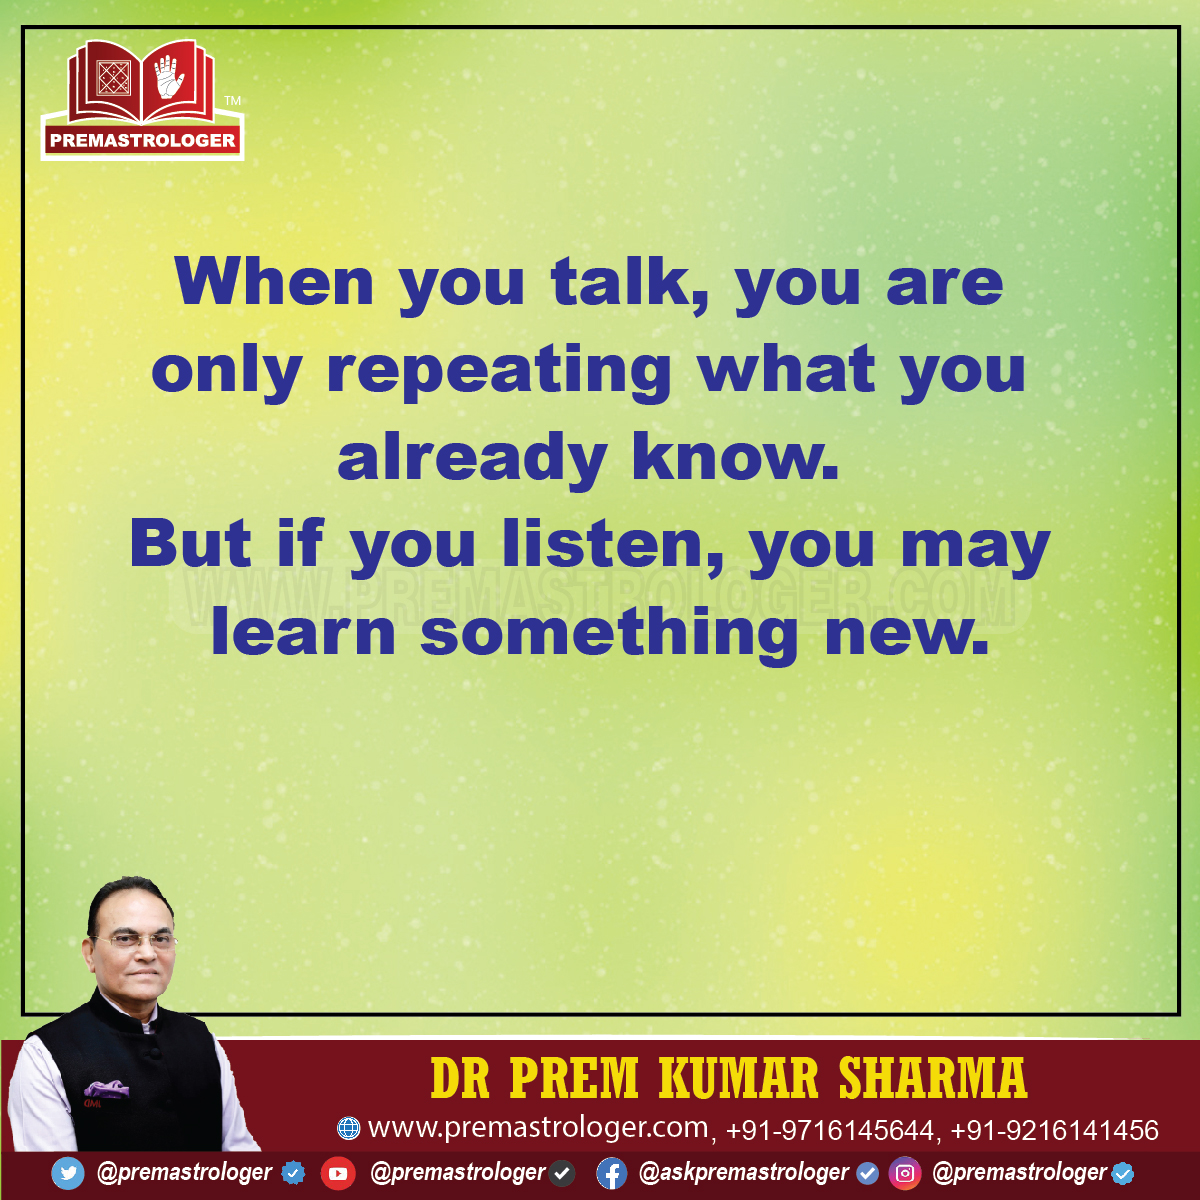 When you talk, you are only repeating what you already know. But if you listen, you may learn something new. #GoodmorningTwitter #सुप्रभात #Fridaymorninglive #FridayVibes #Fridaymotivations #Fridaymorning #FridayThoughts